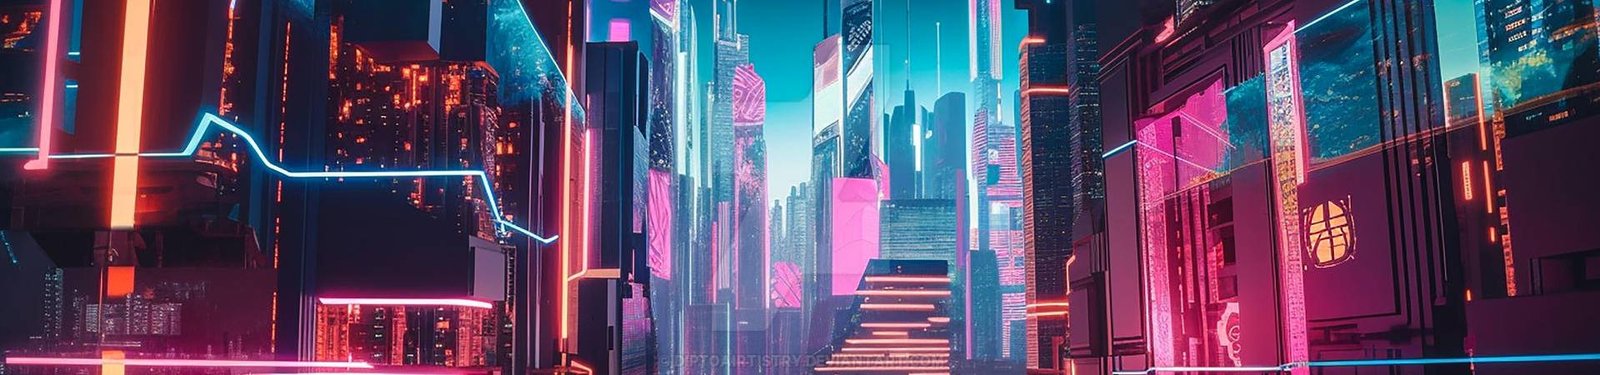 a_sleek_futuristic_cityscape_with_neon_lights__ai__by_diptoairtistry_dfxd9ns-fullview